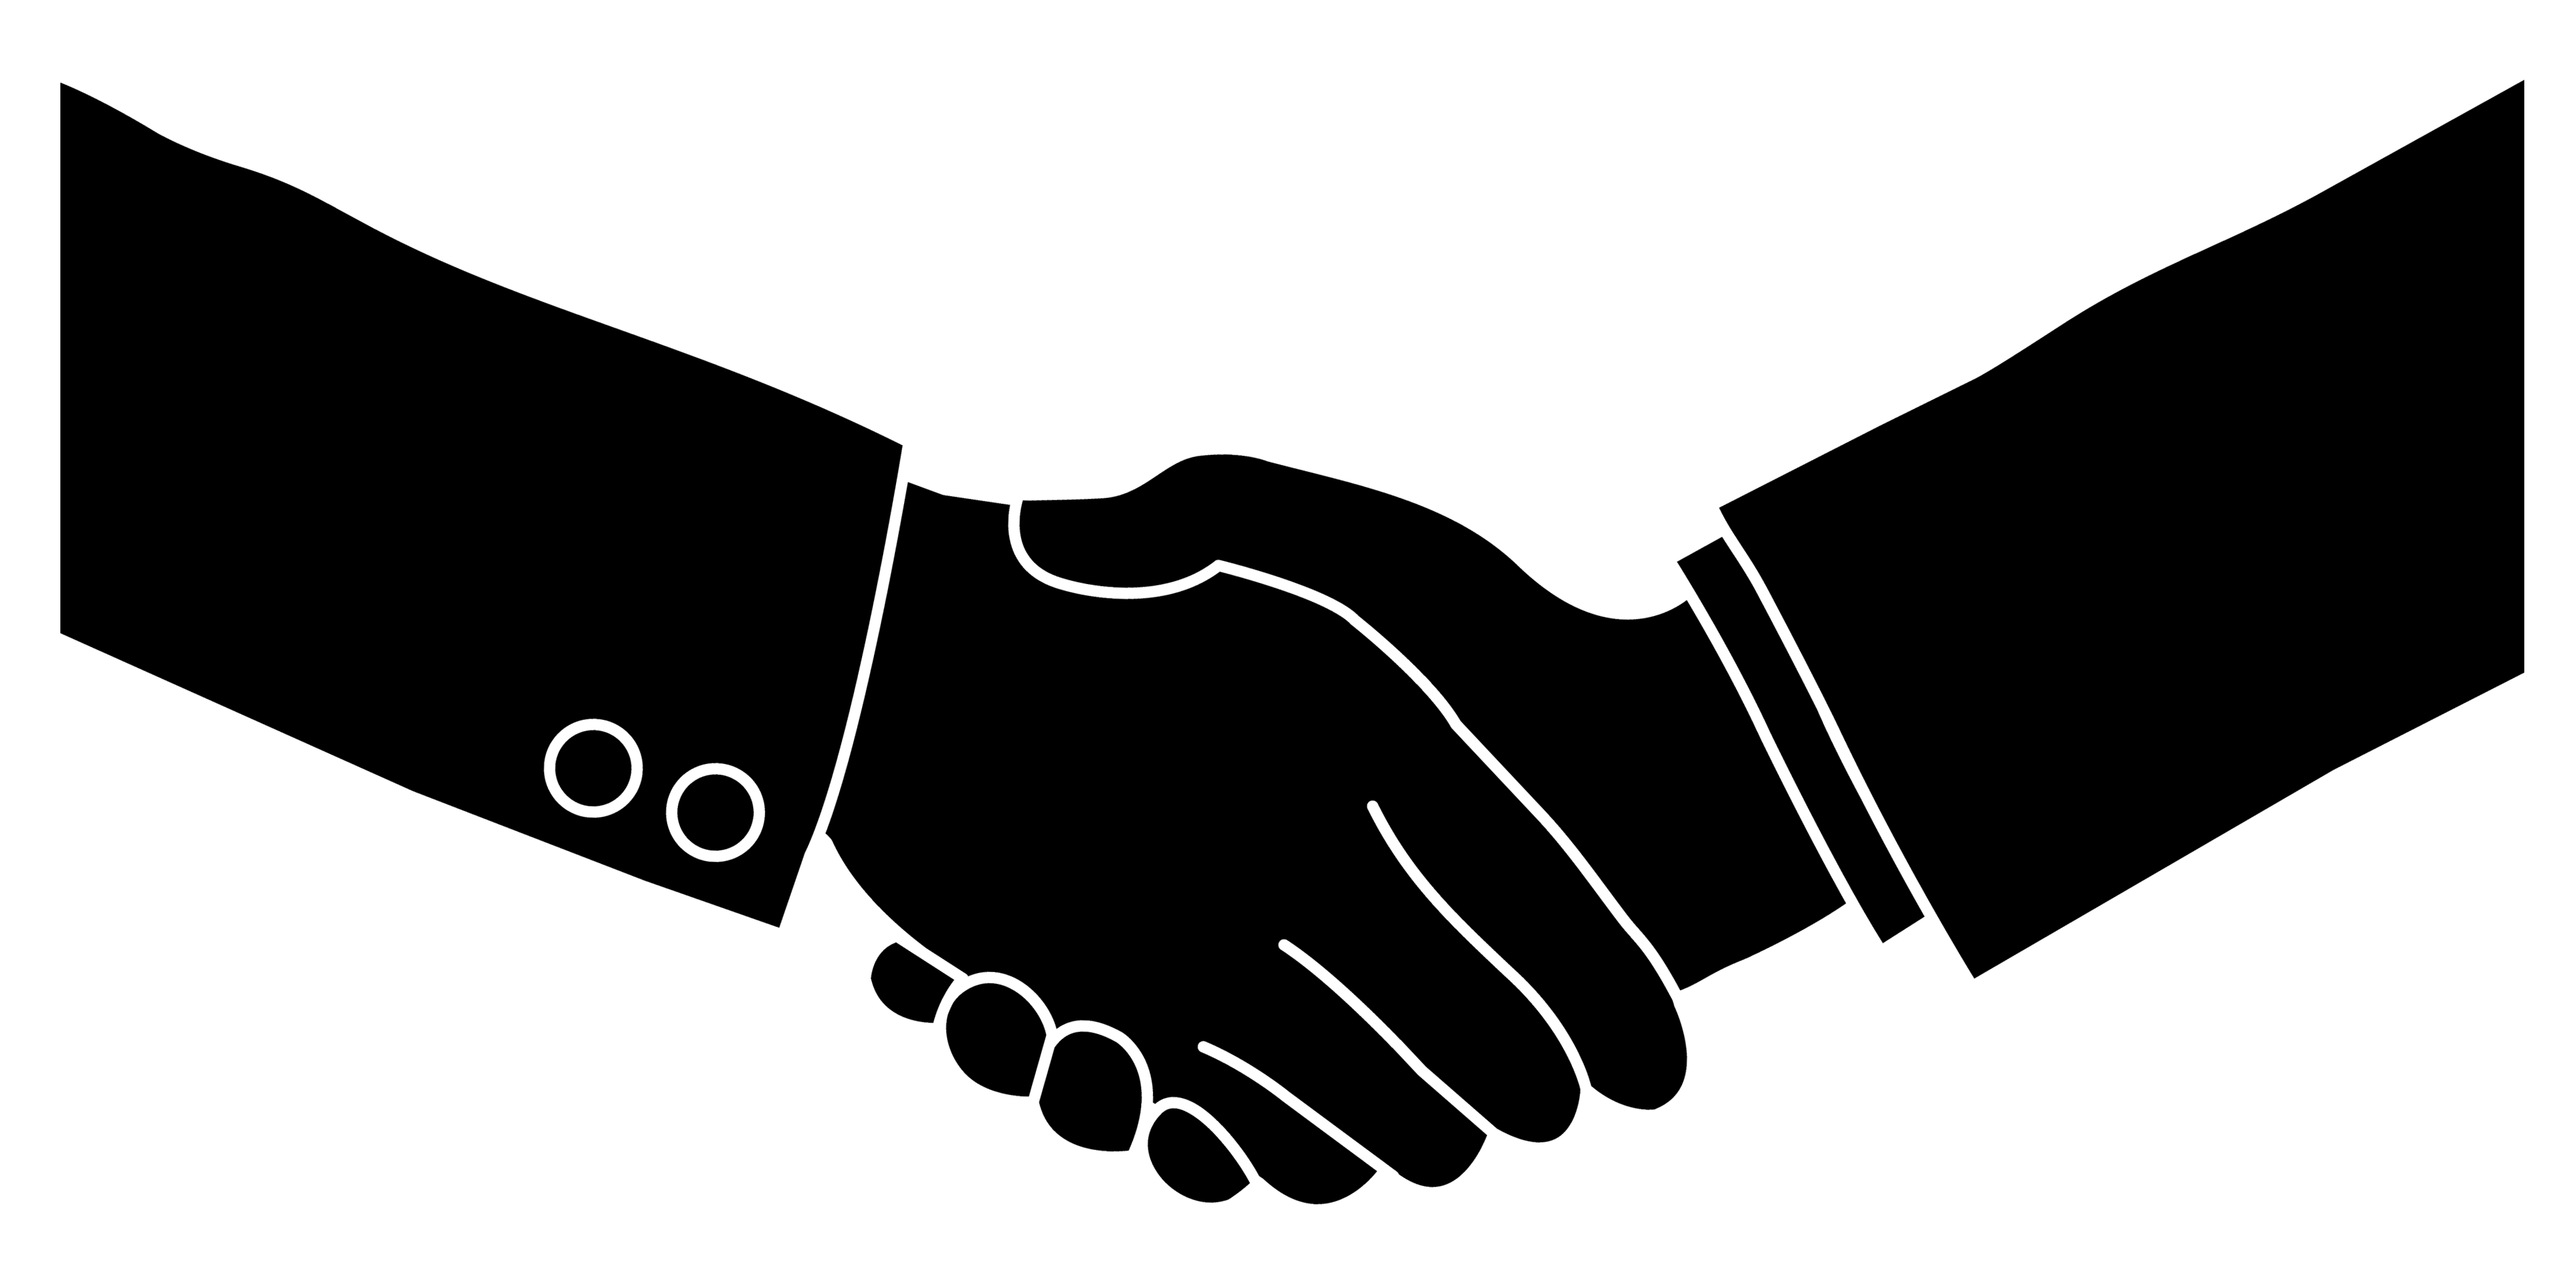 Shaking Hands Clip Artpng Clipart - Free to use Clip Art Resource